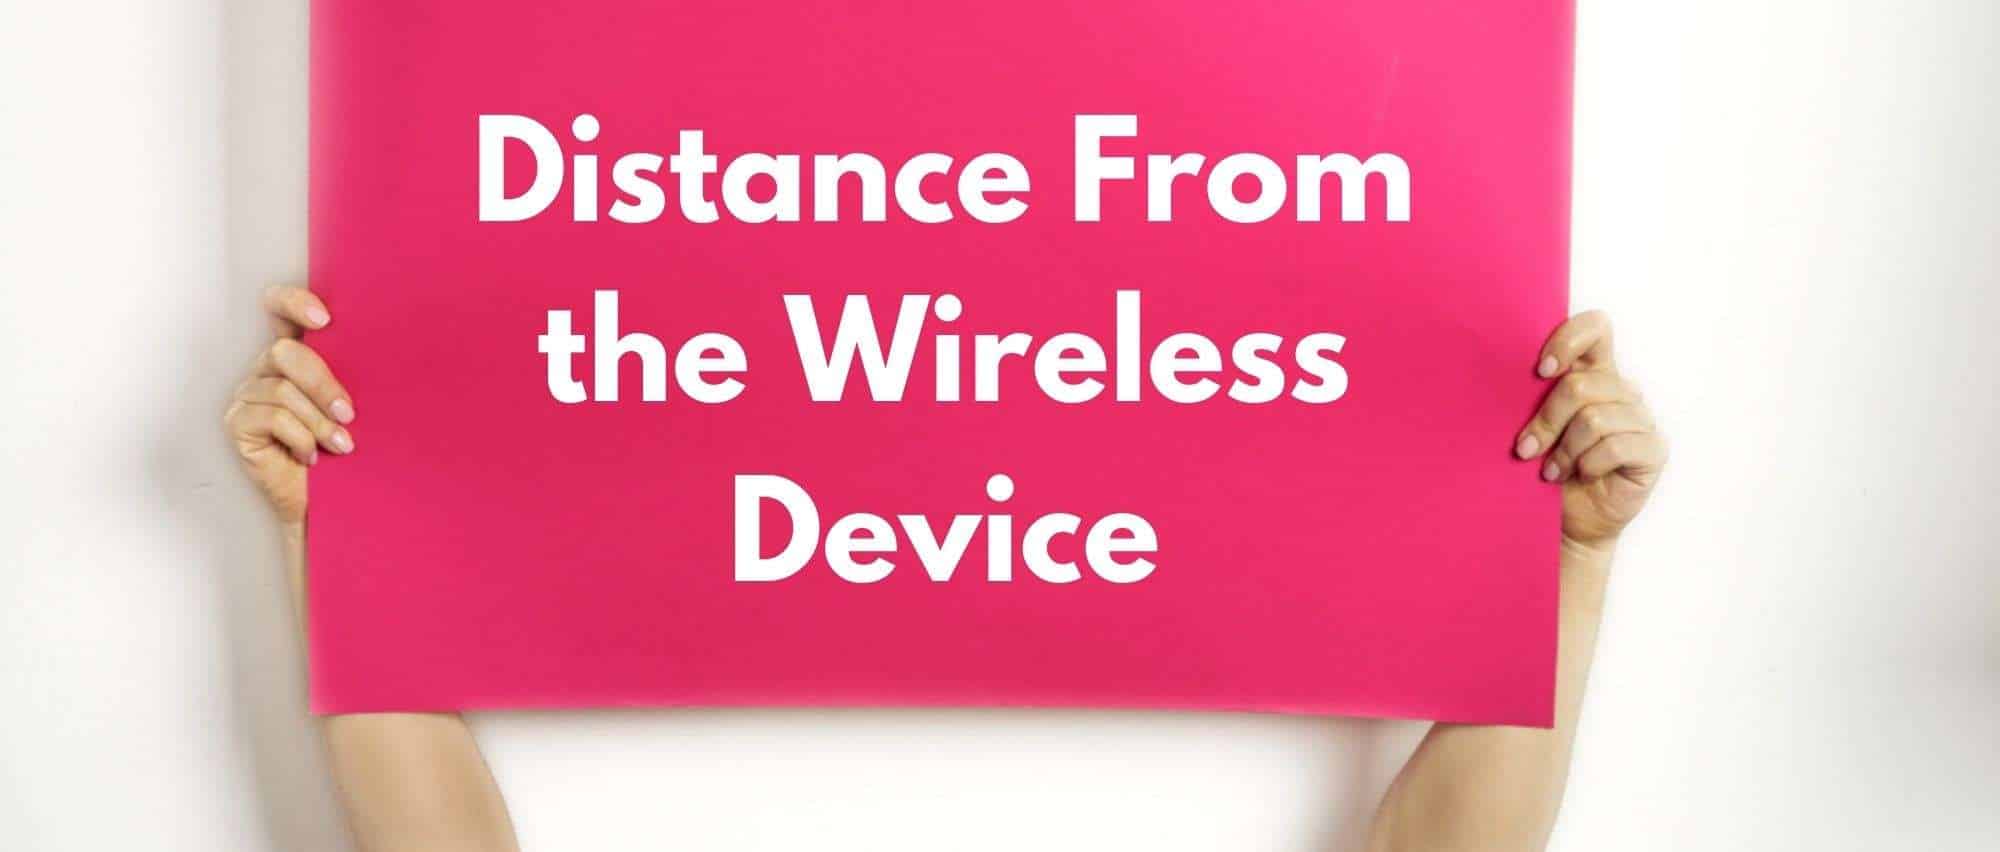 Distance From the Wireless Device